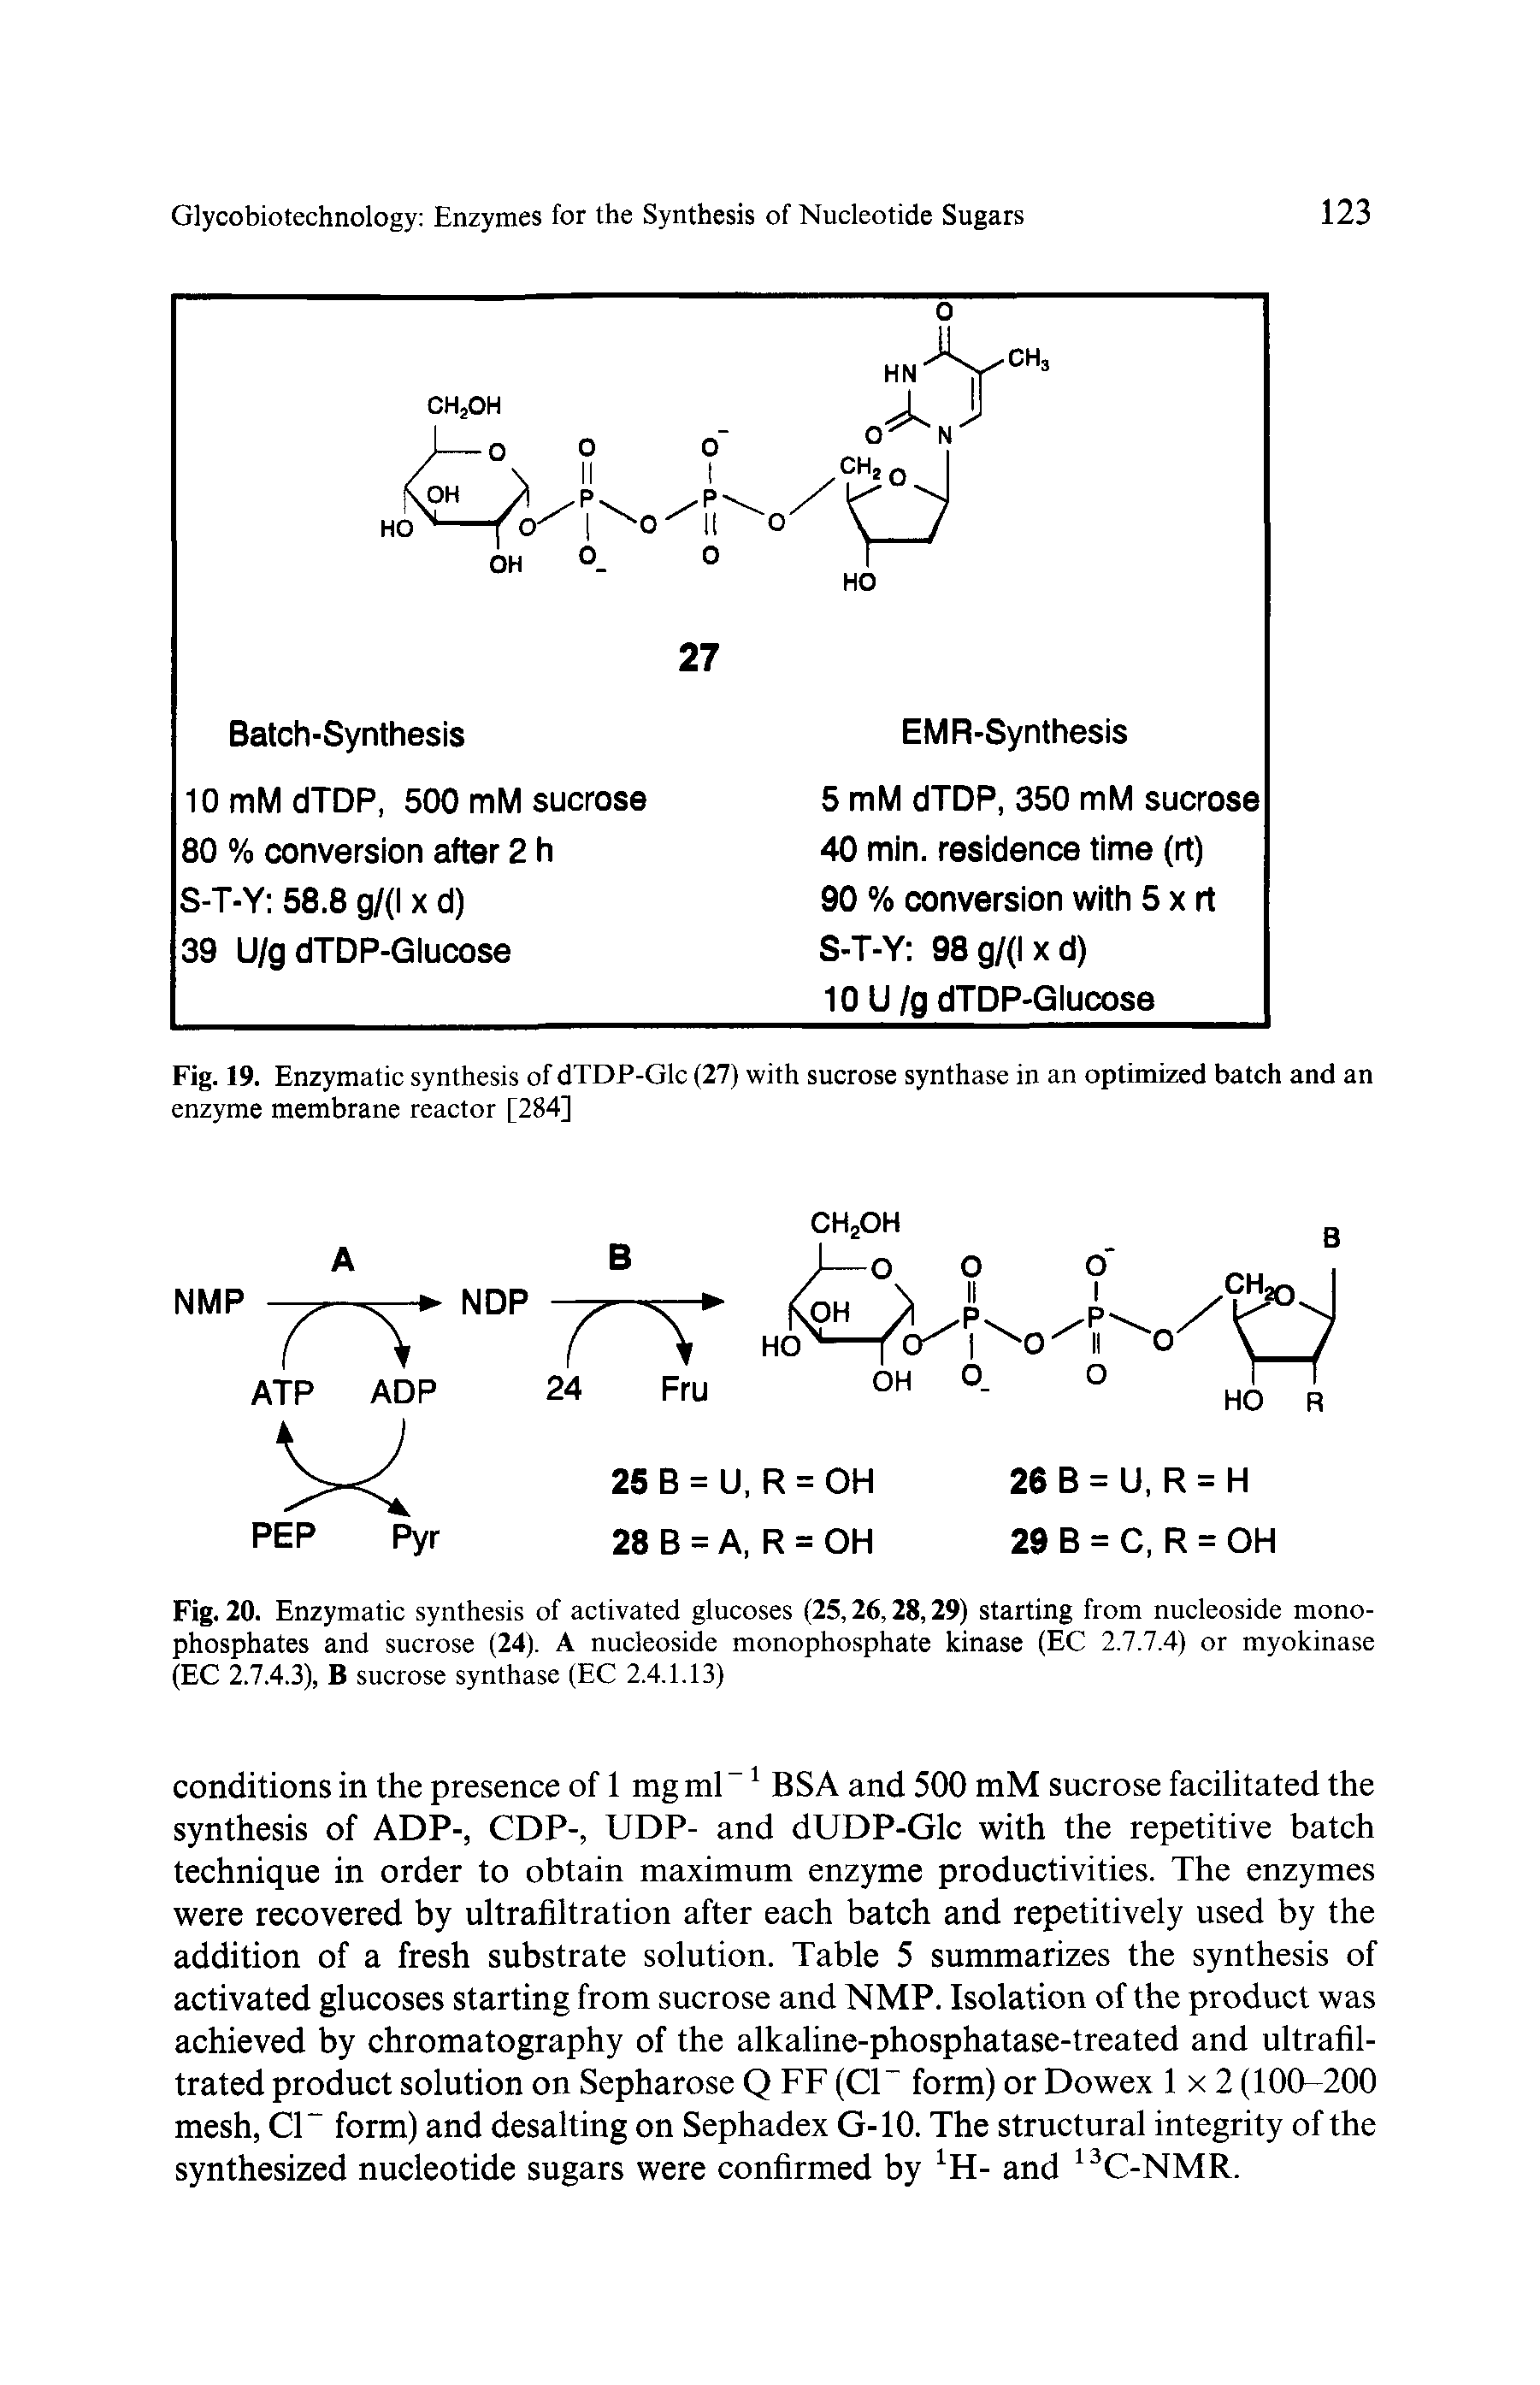 Fig. 20. Enzymatic synthesis of activated glucoses (25,26,28,29) starting from nucleoside monophosphates and sucrose (24). A nucleoside monophosphate kinase (EC 2.7.7.4) or myokinase (EC 2.7.4.3), B sucrose synthase (EC 2.4.1.13)...